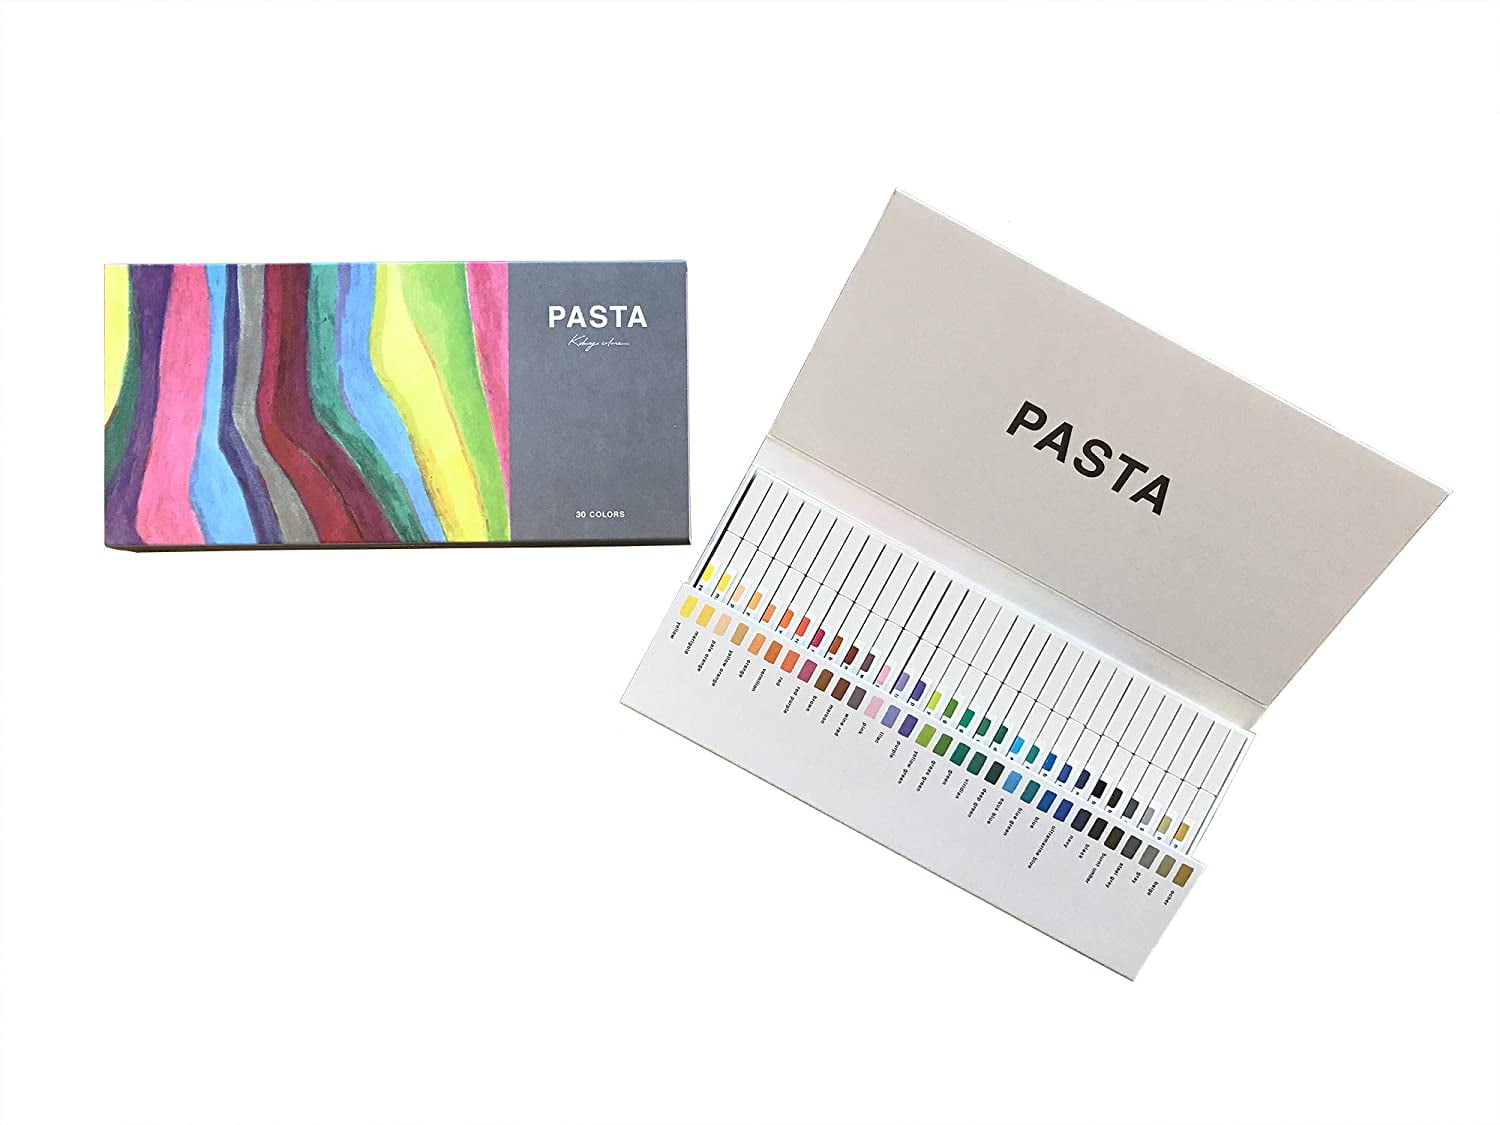 Kokuyo Japan Graphic Marker Pasta 30 Color Set Aqueous for Drawing KE-SP15-30 with Kanji Love Sticker, 5.19x0.35x0.43 in